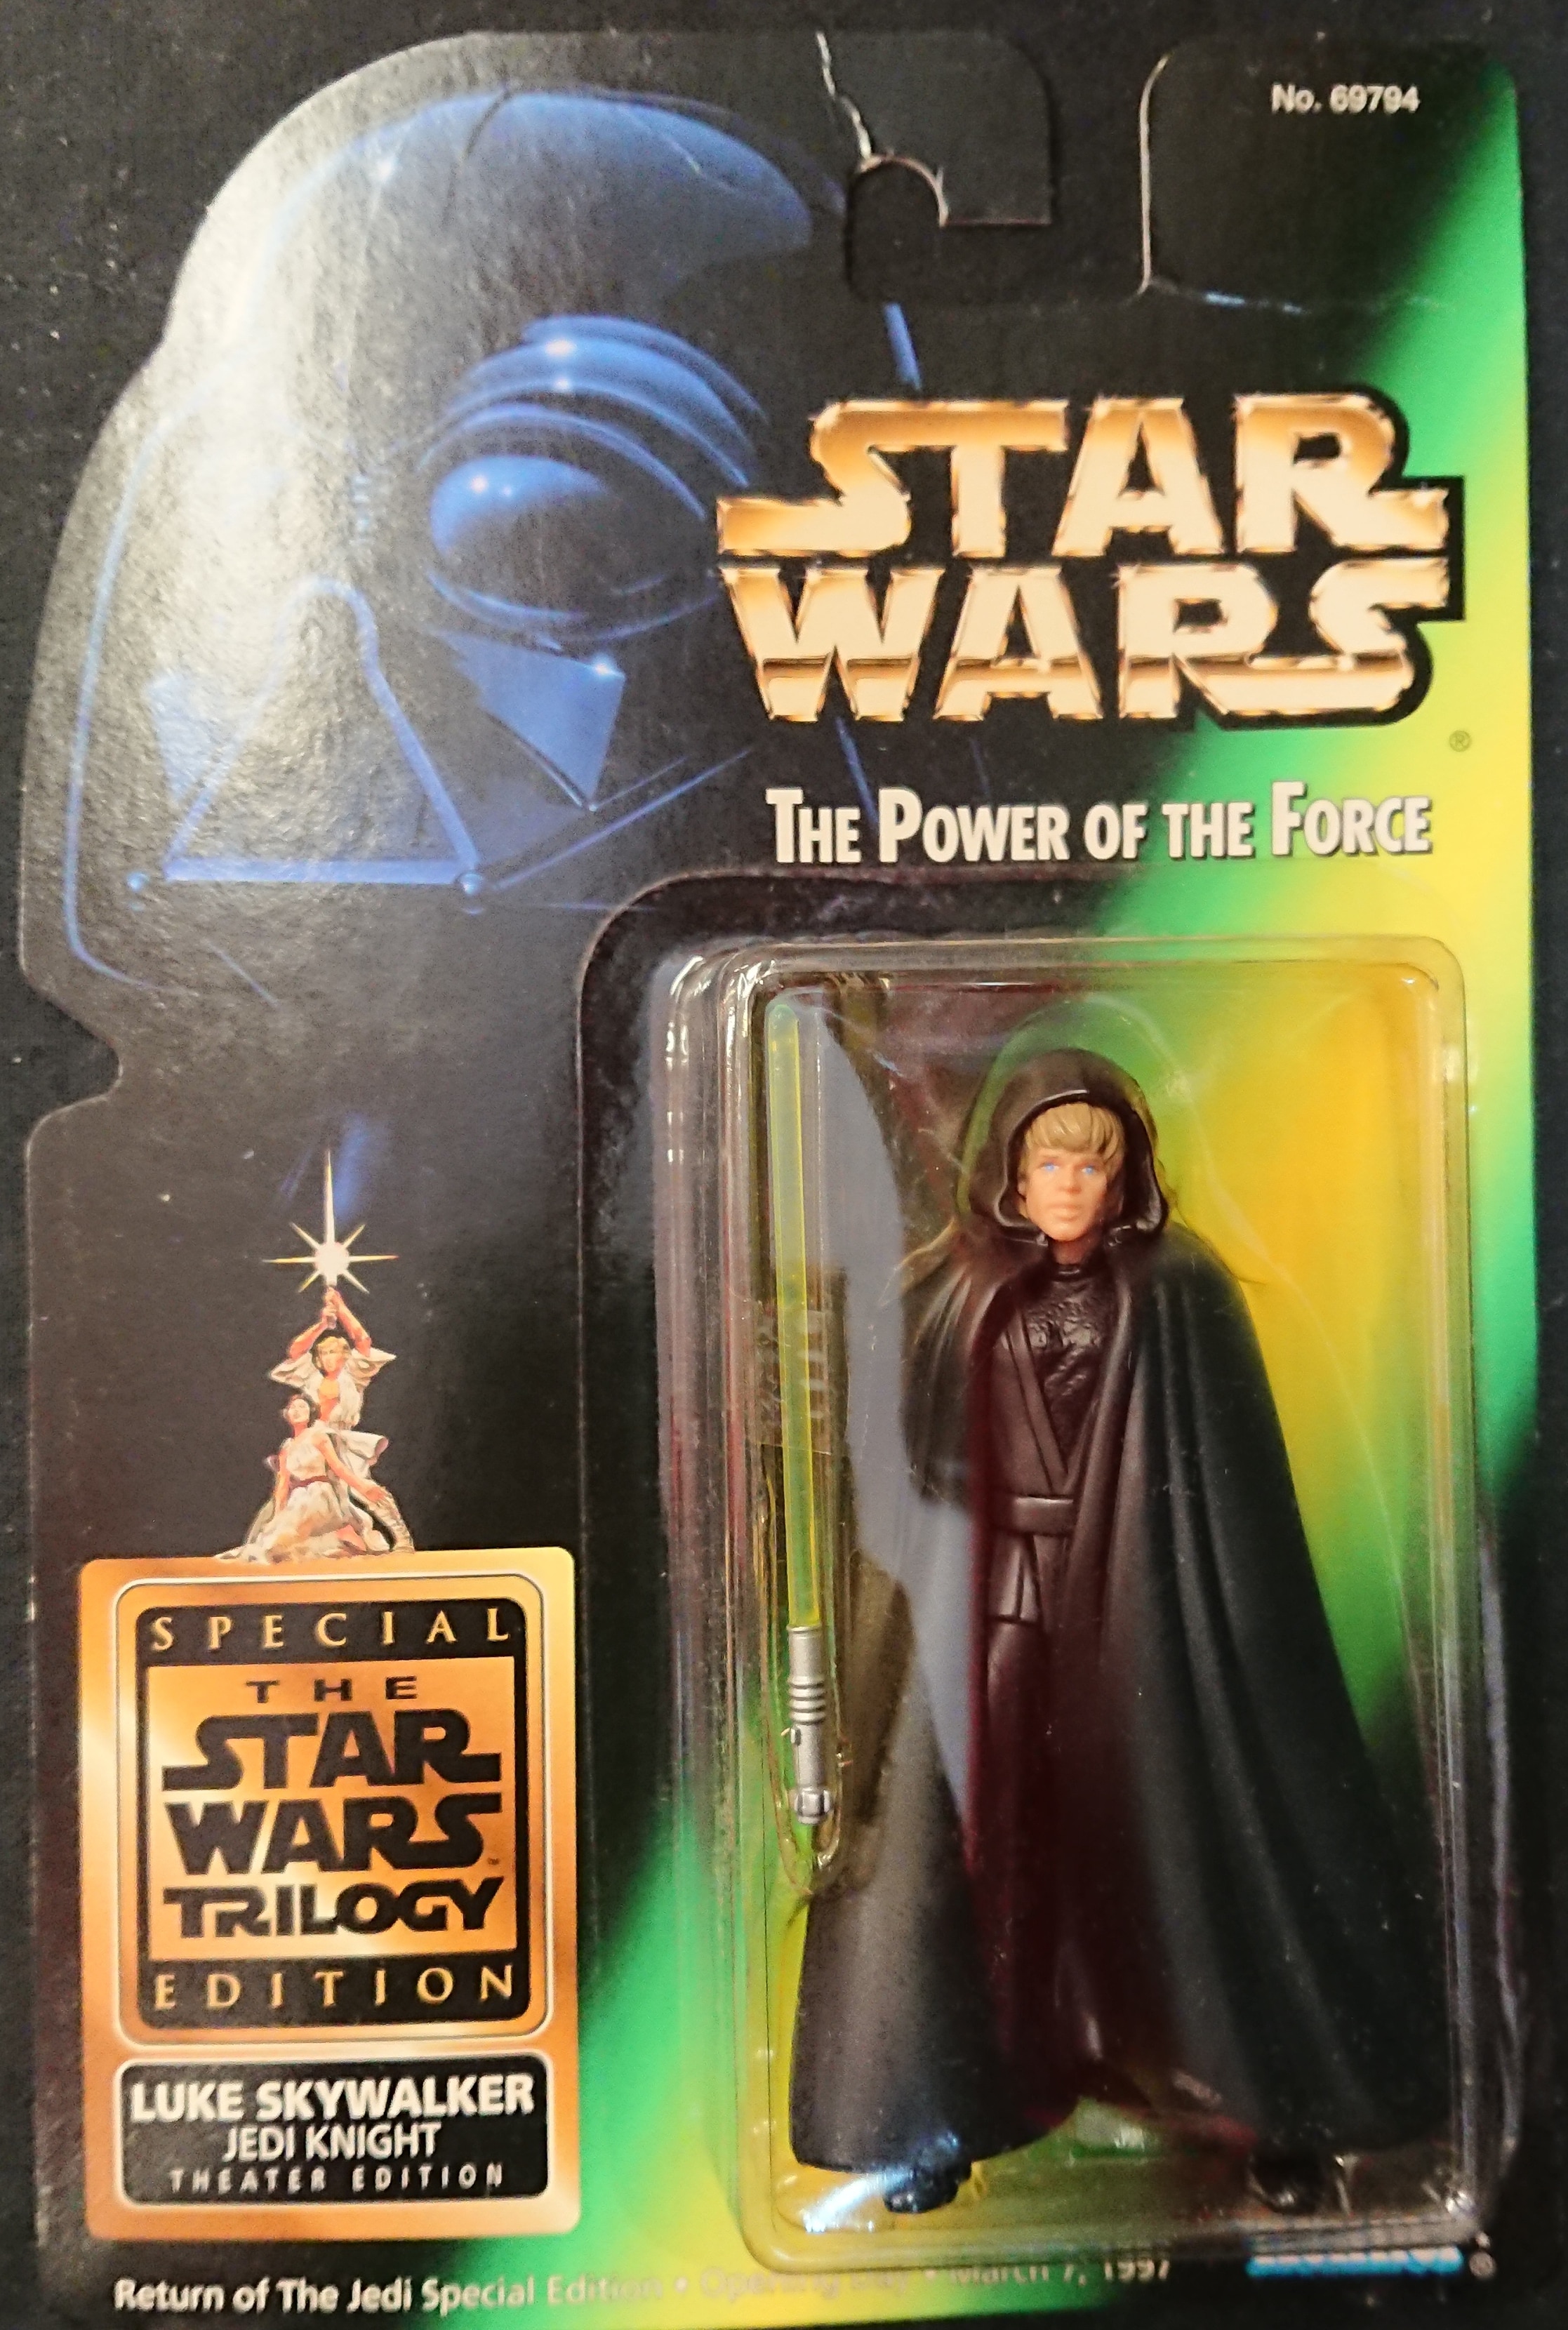 KENNER THE STAR WARS TRILOGY / SPECIAL EDITION 3.5インチ 【ルーク